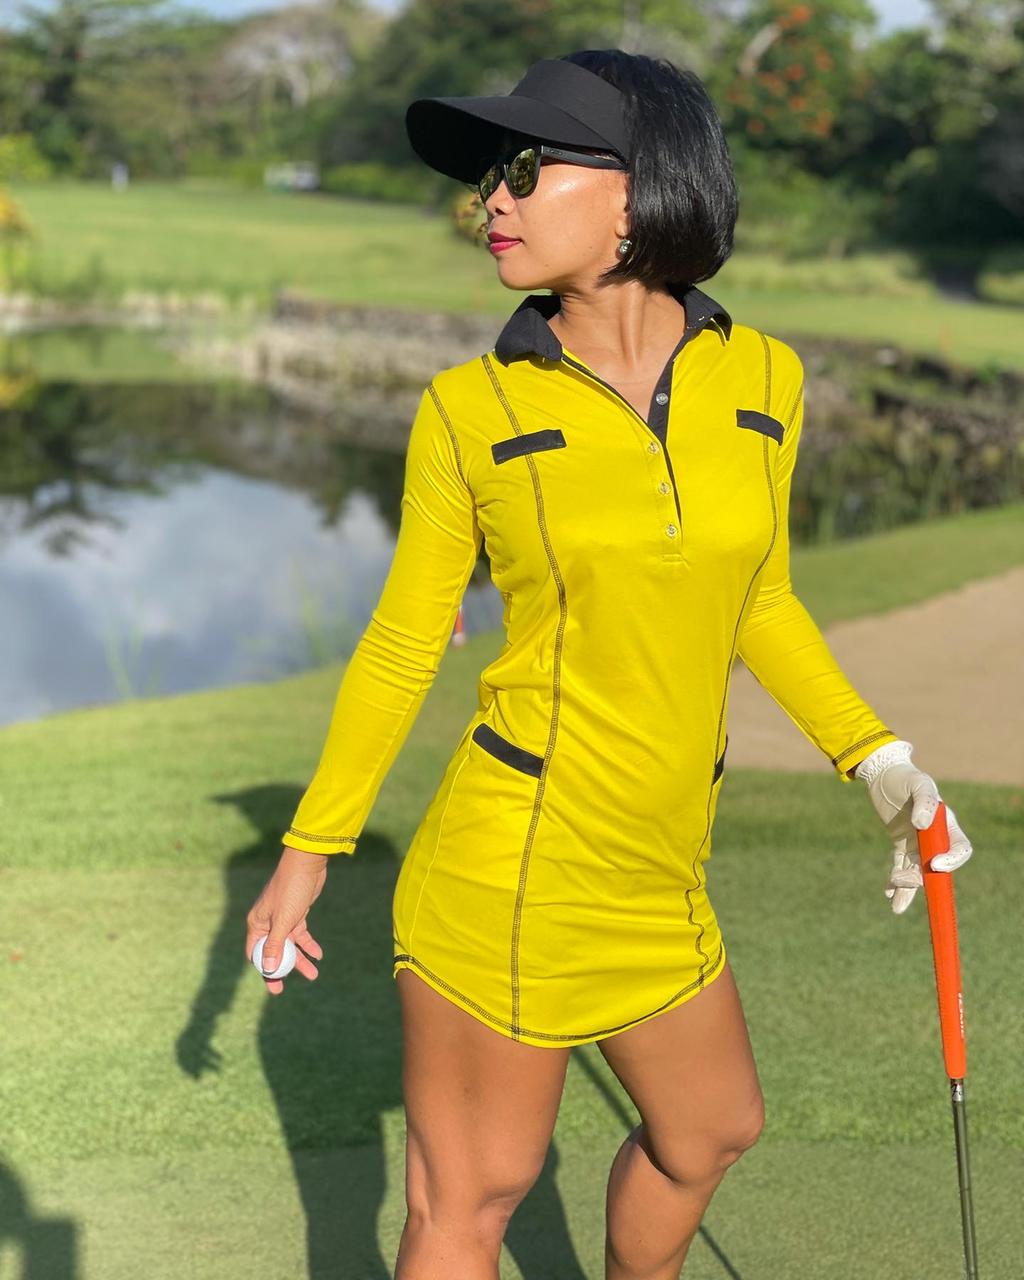 GD-012B || Golf Dress Bright Yellow With Black Trim And Black Overlocked Seams  LS  Mock Breast Pocket Trims With 2 Waist Pockets